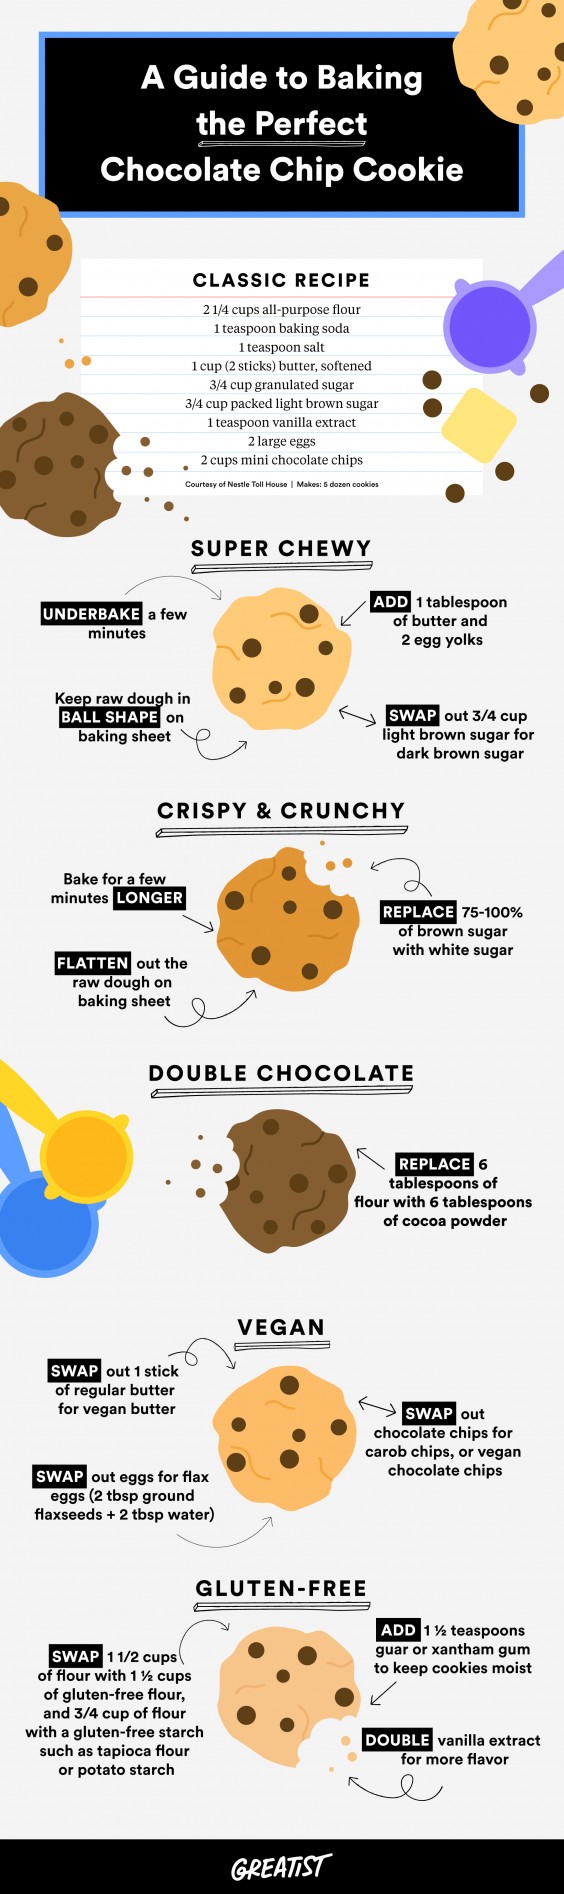 How to Achieve Chocolate Chip Cookie Perfection